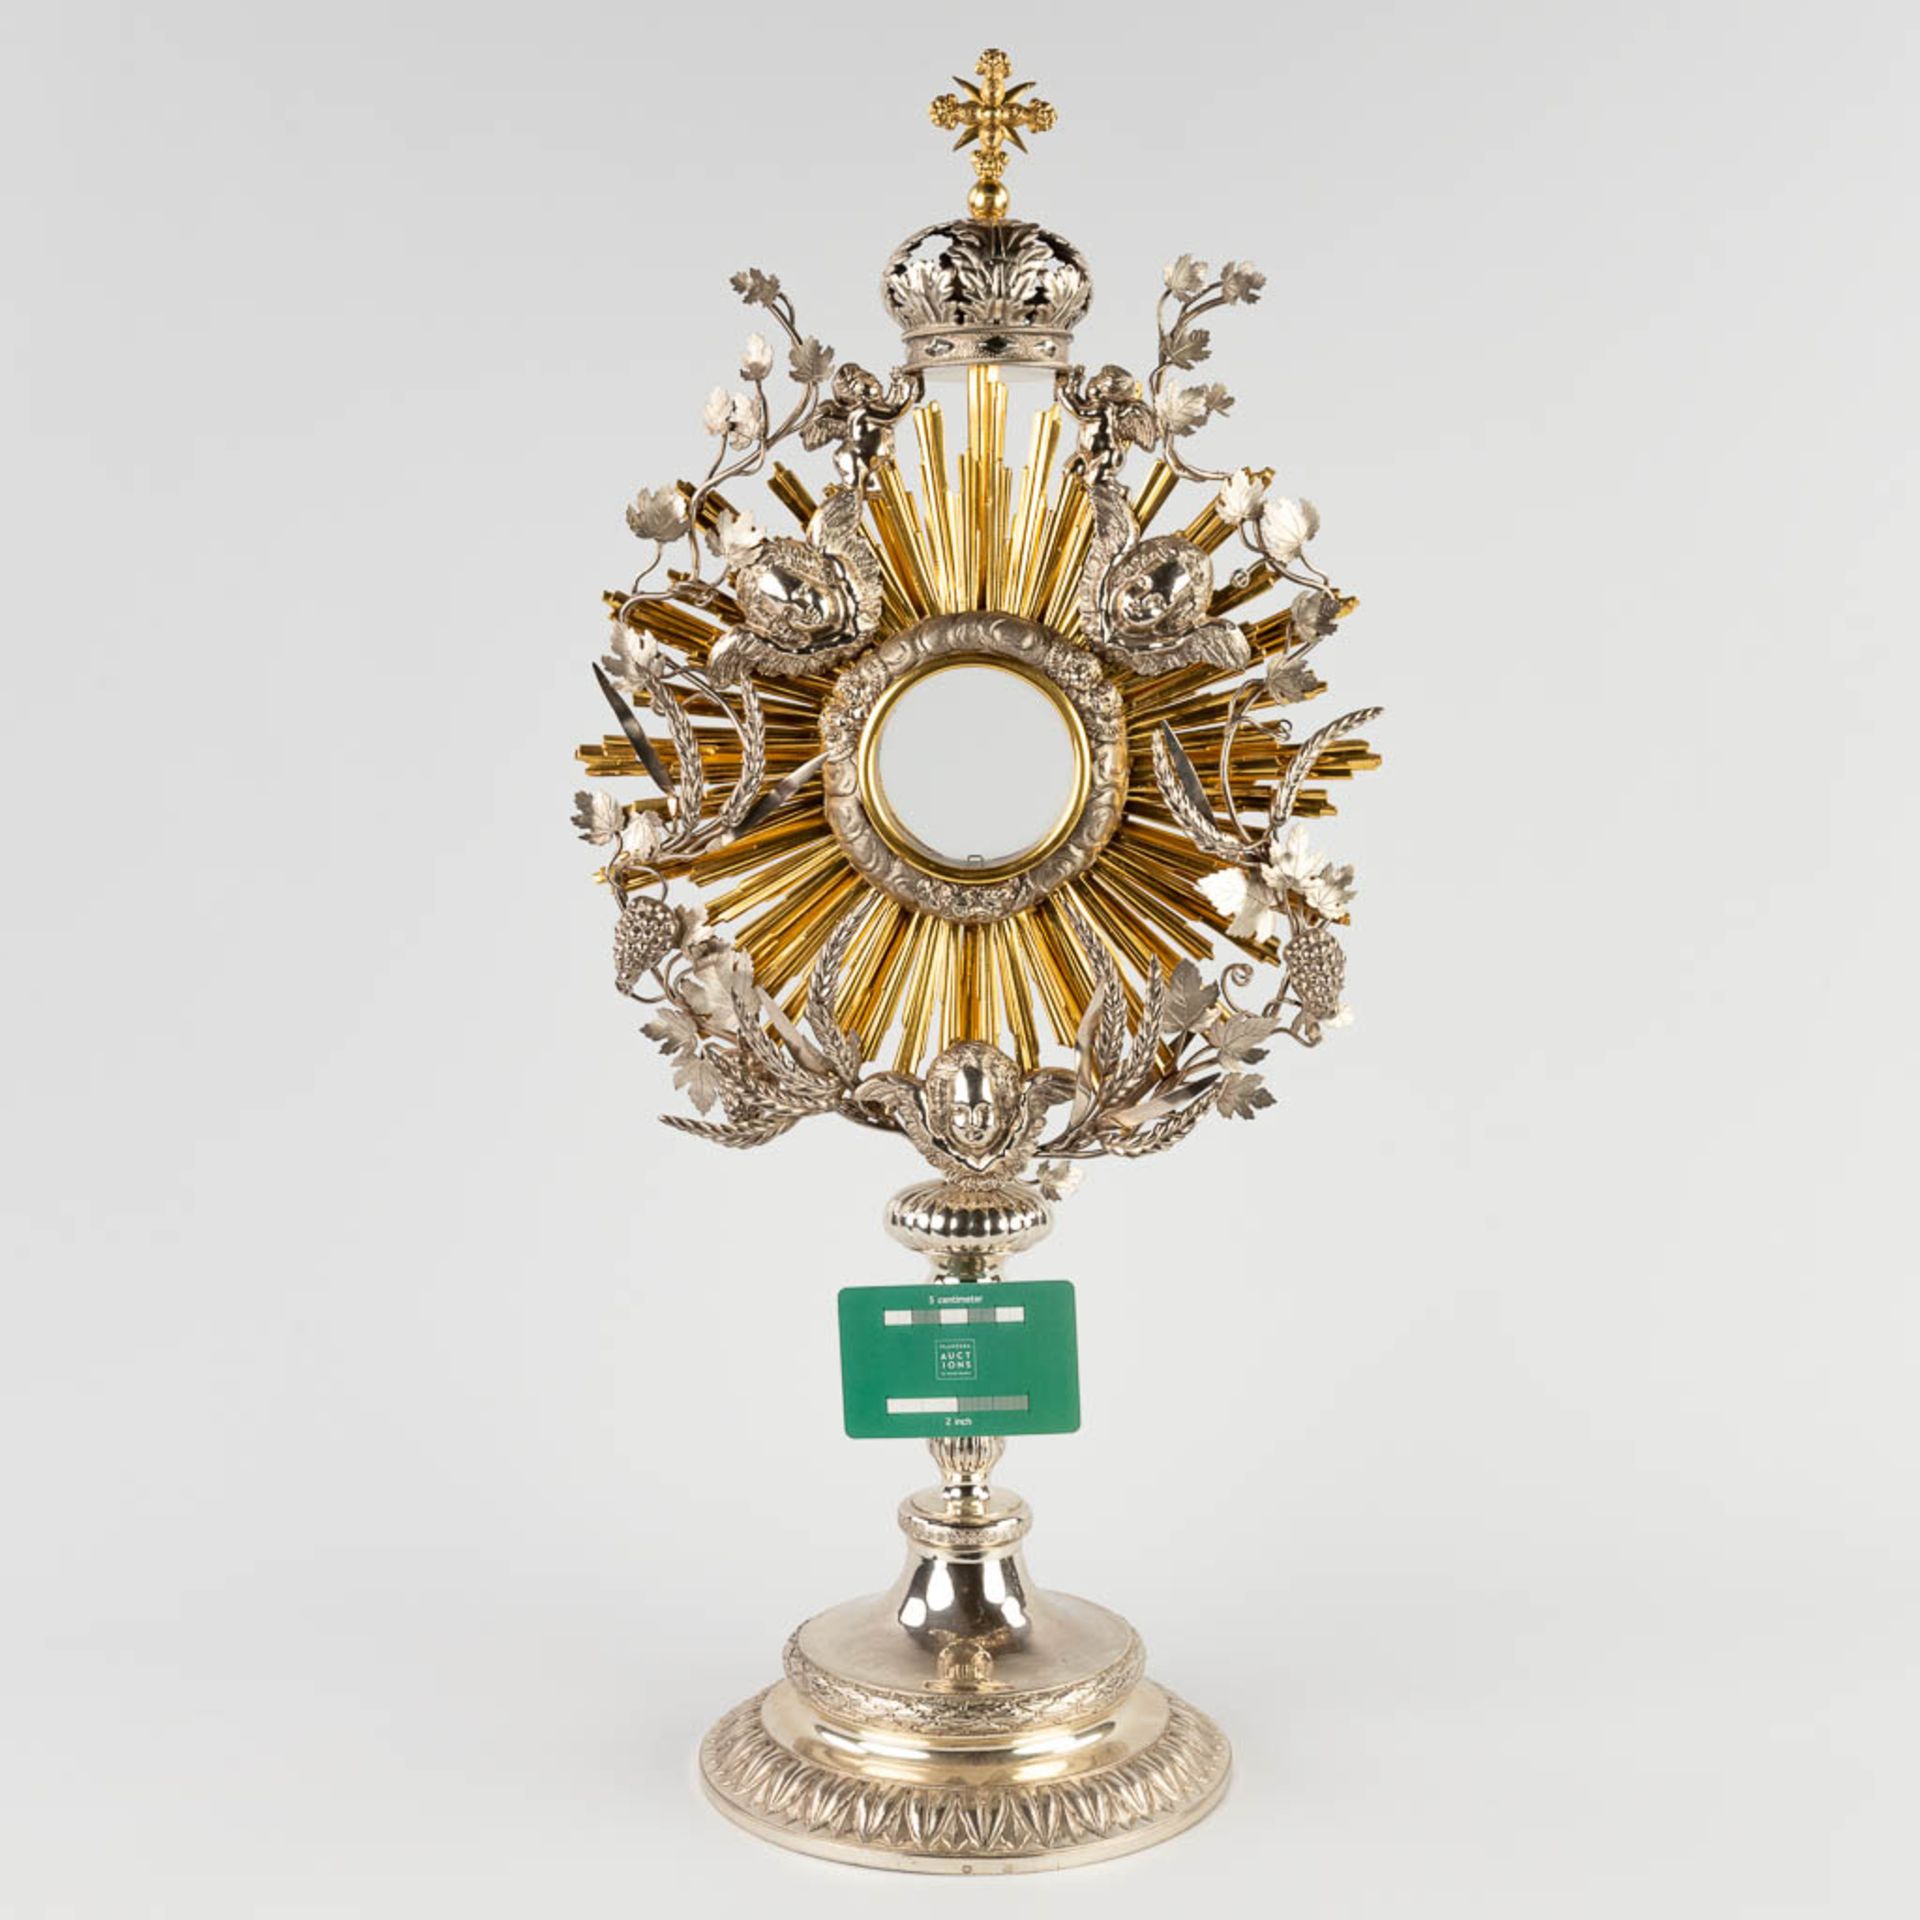 A sunburst monstrance, silver, decorated with angels, wheat and grape vines. Belgium, 19th C. (D:20 - Image 2 of 22